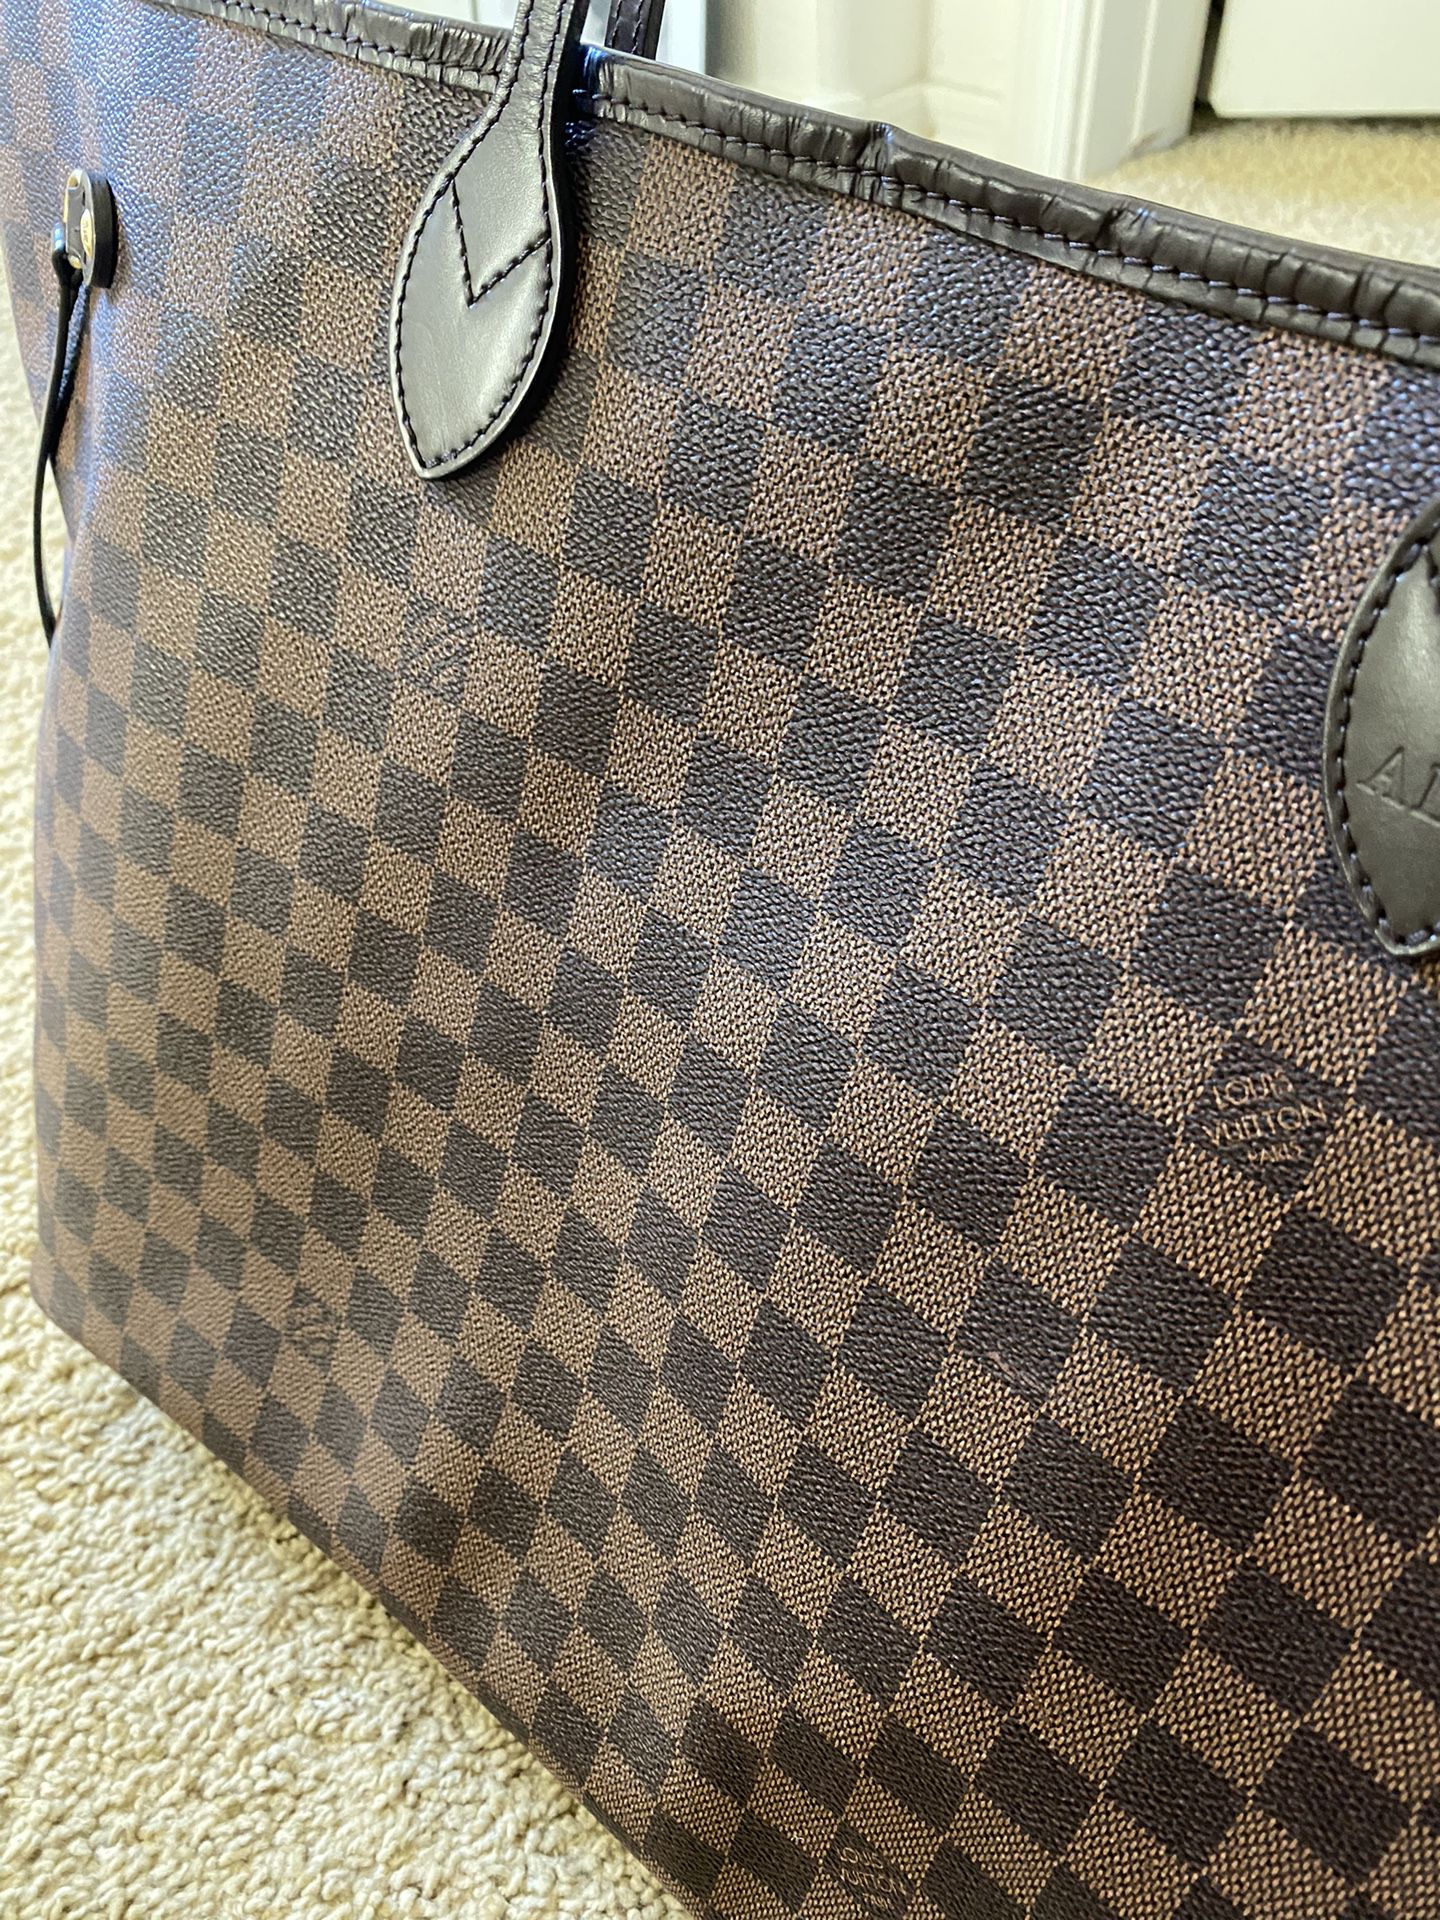 Neverfull GM $250 for Sale in Vienna, VA - OfferUp